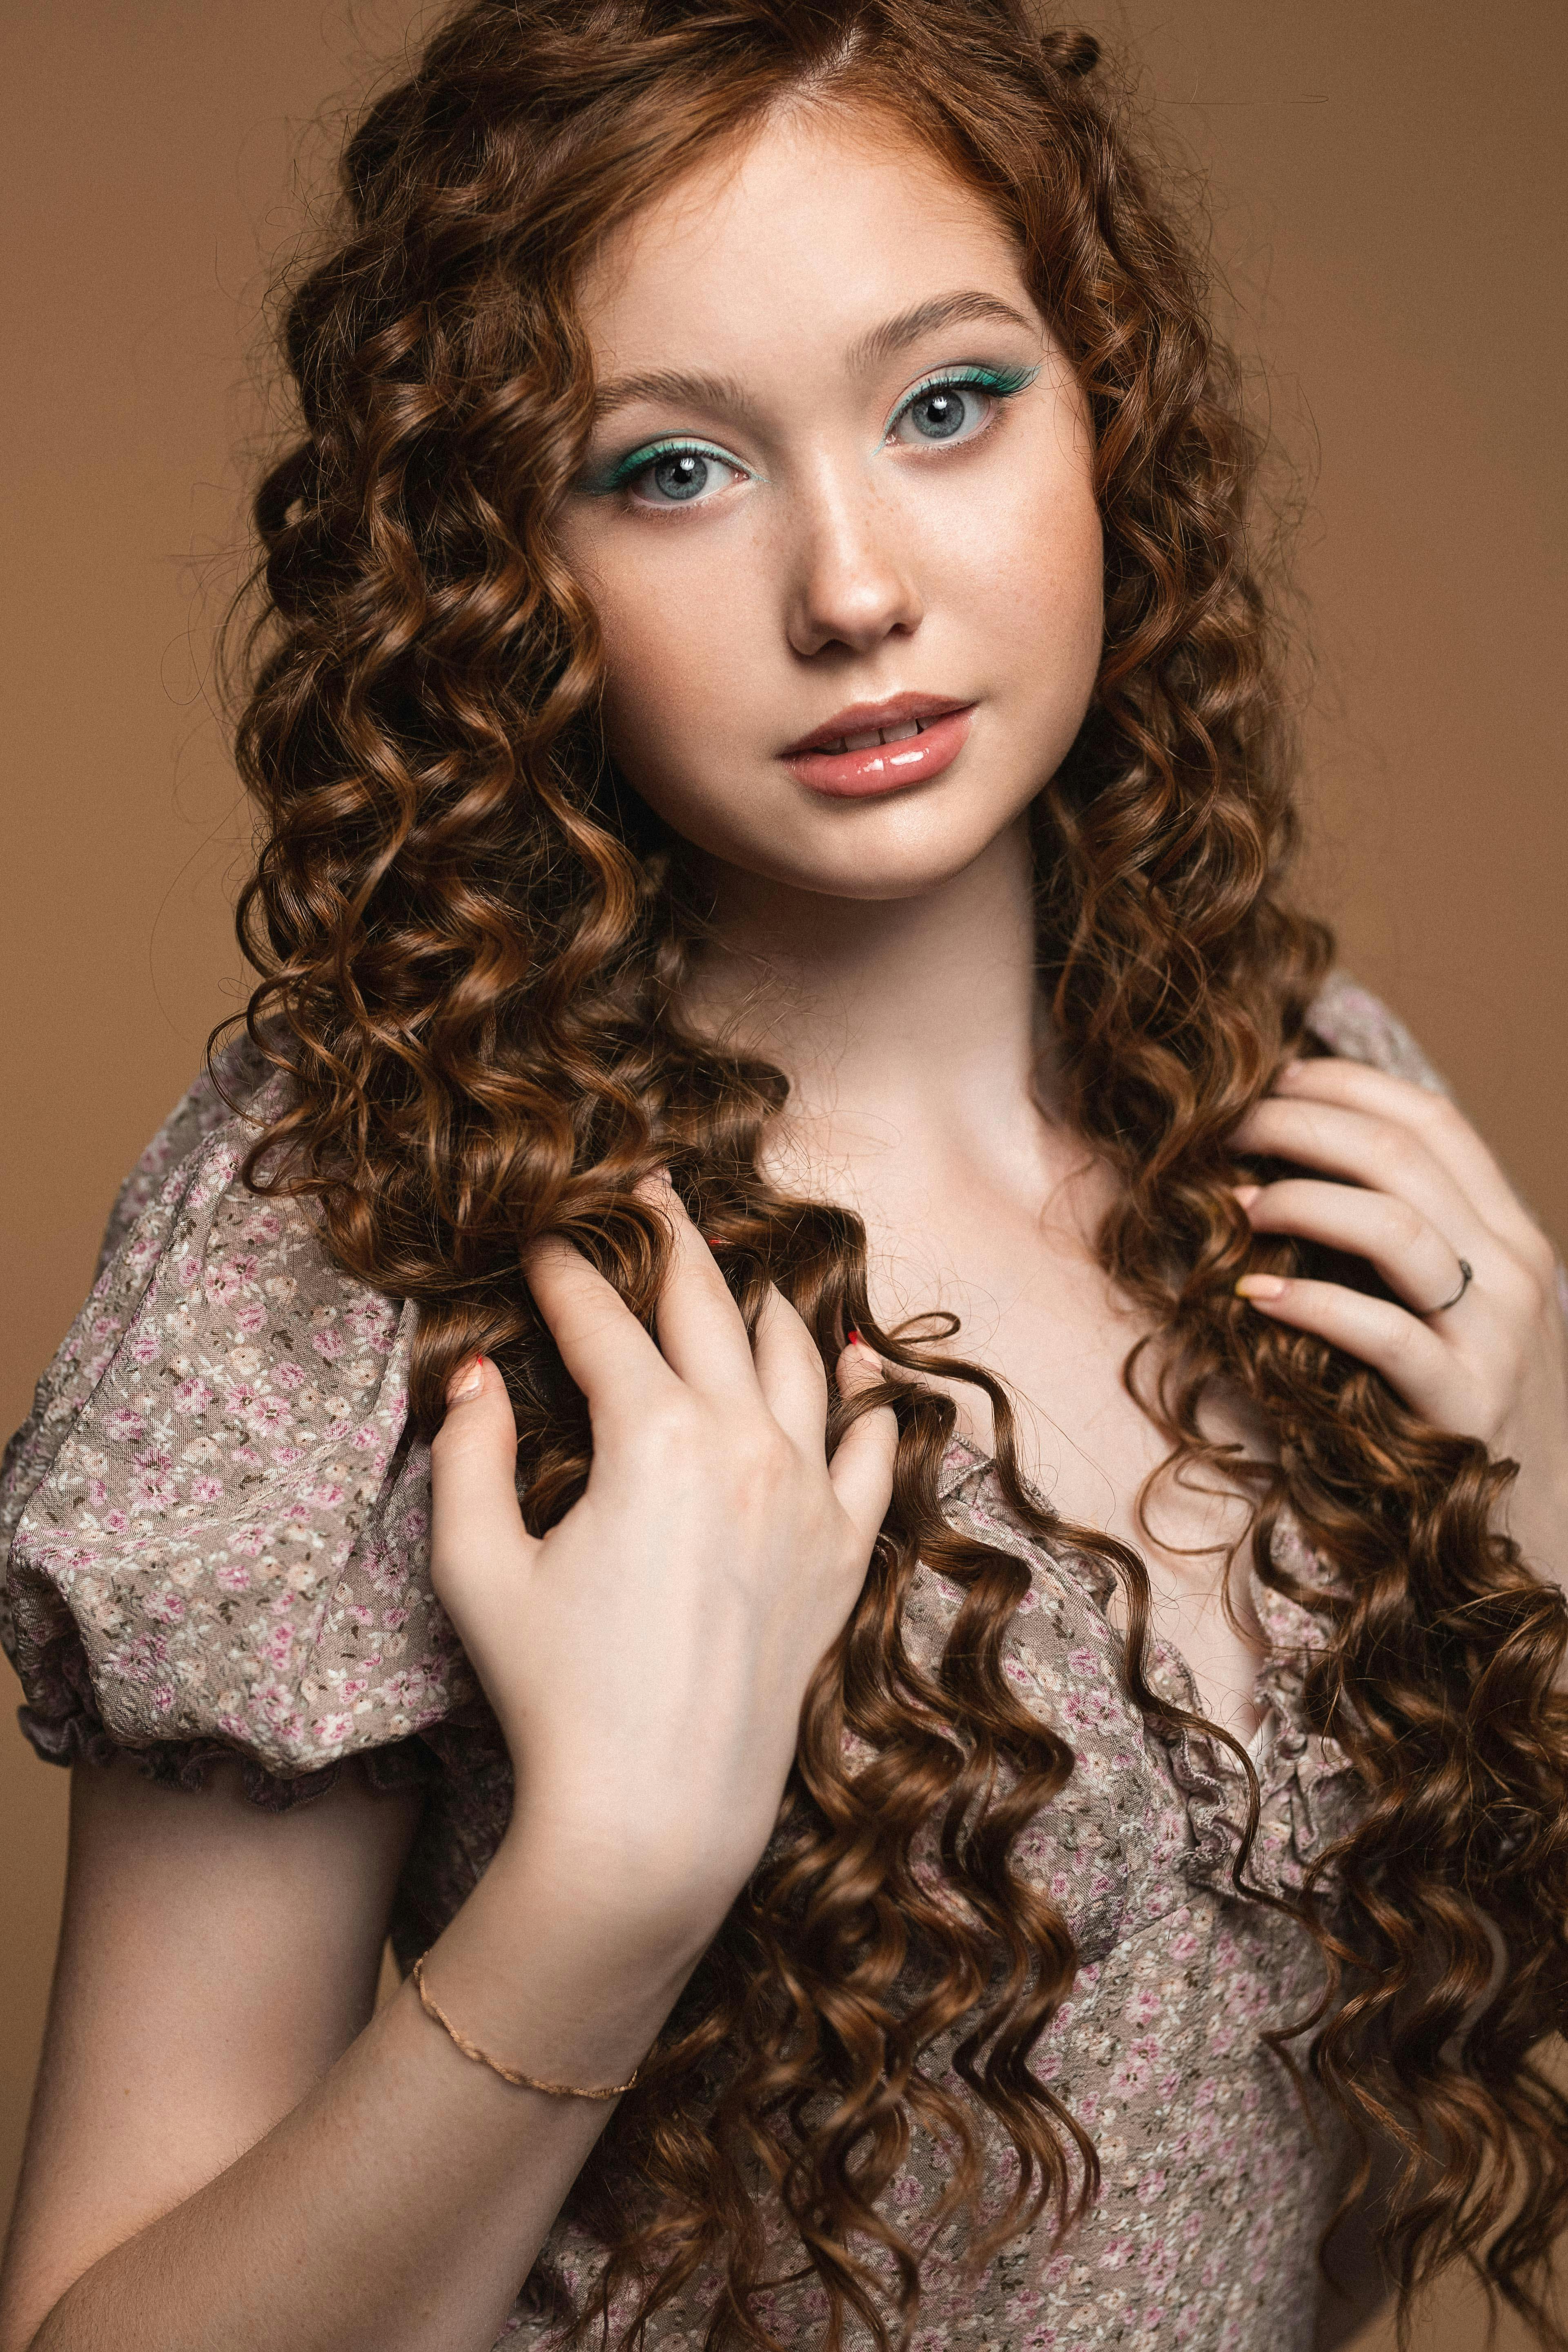 A Pretty Woman with Long Brown Curly Hair · Free Stock Photo